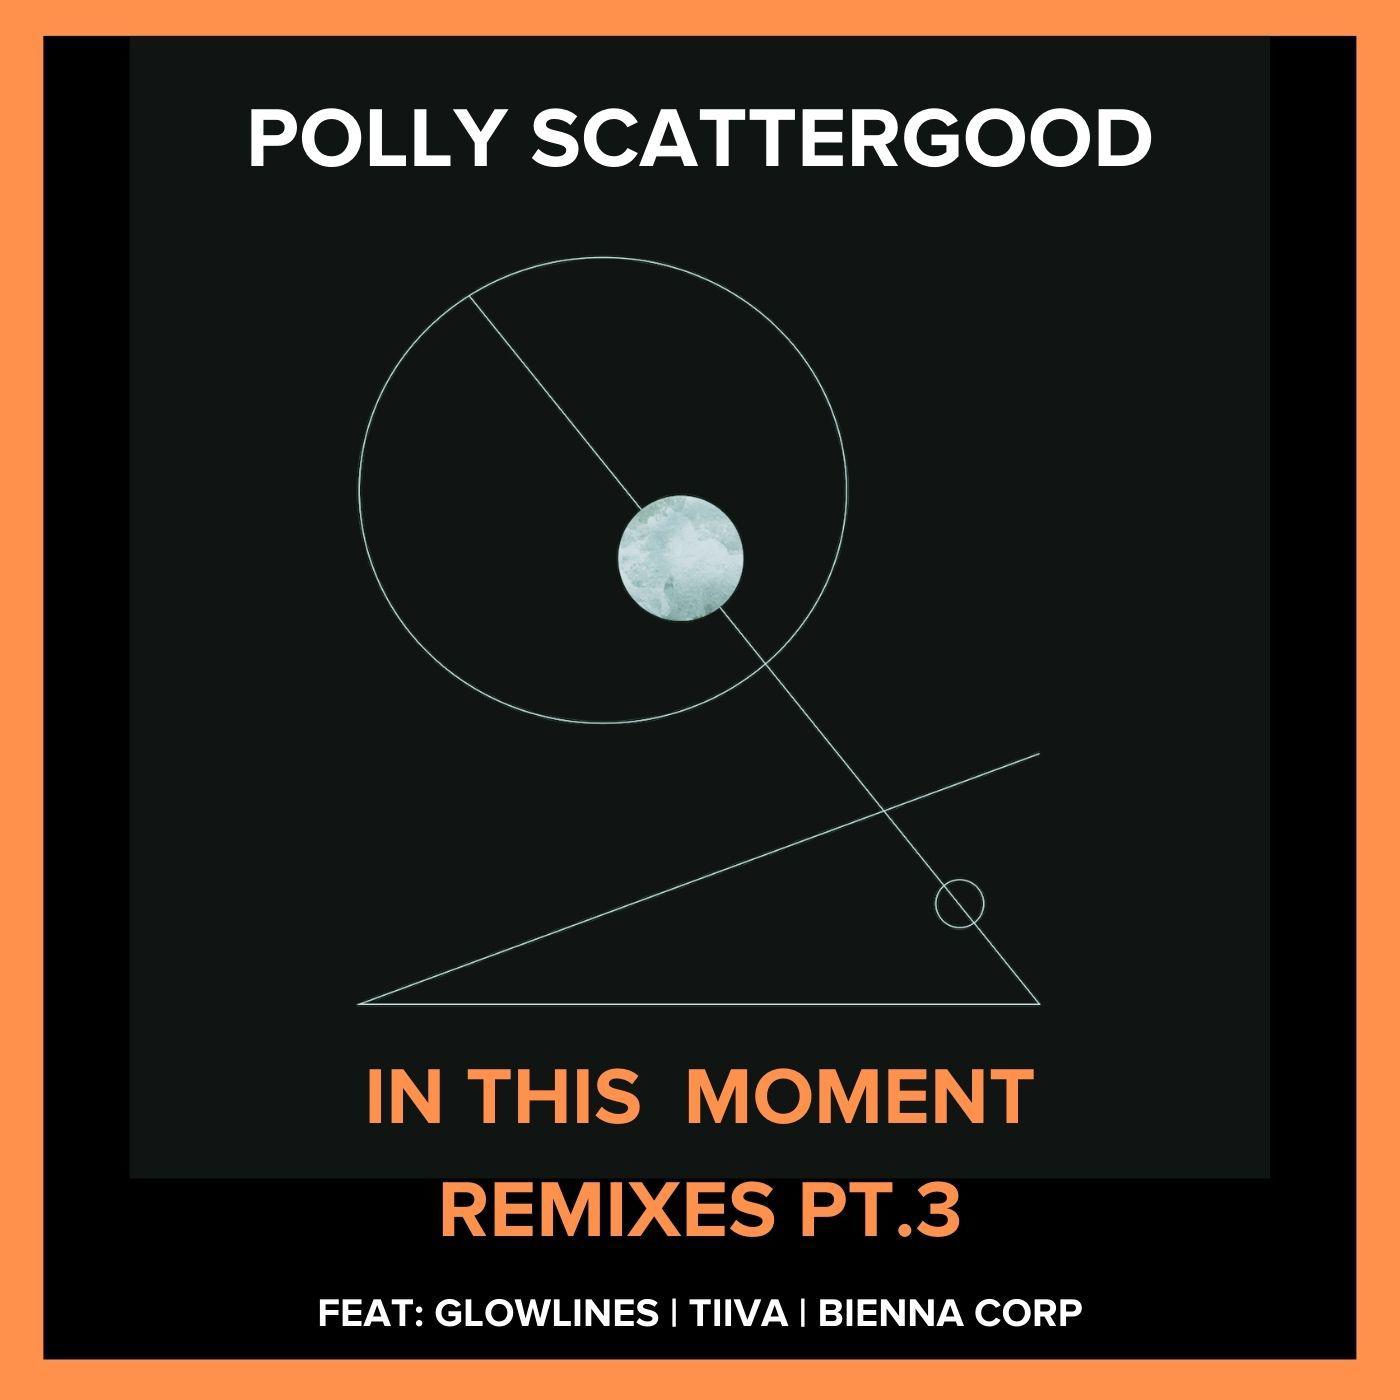 Polly Scattergood - Red (Bienna Corp Remix)